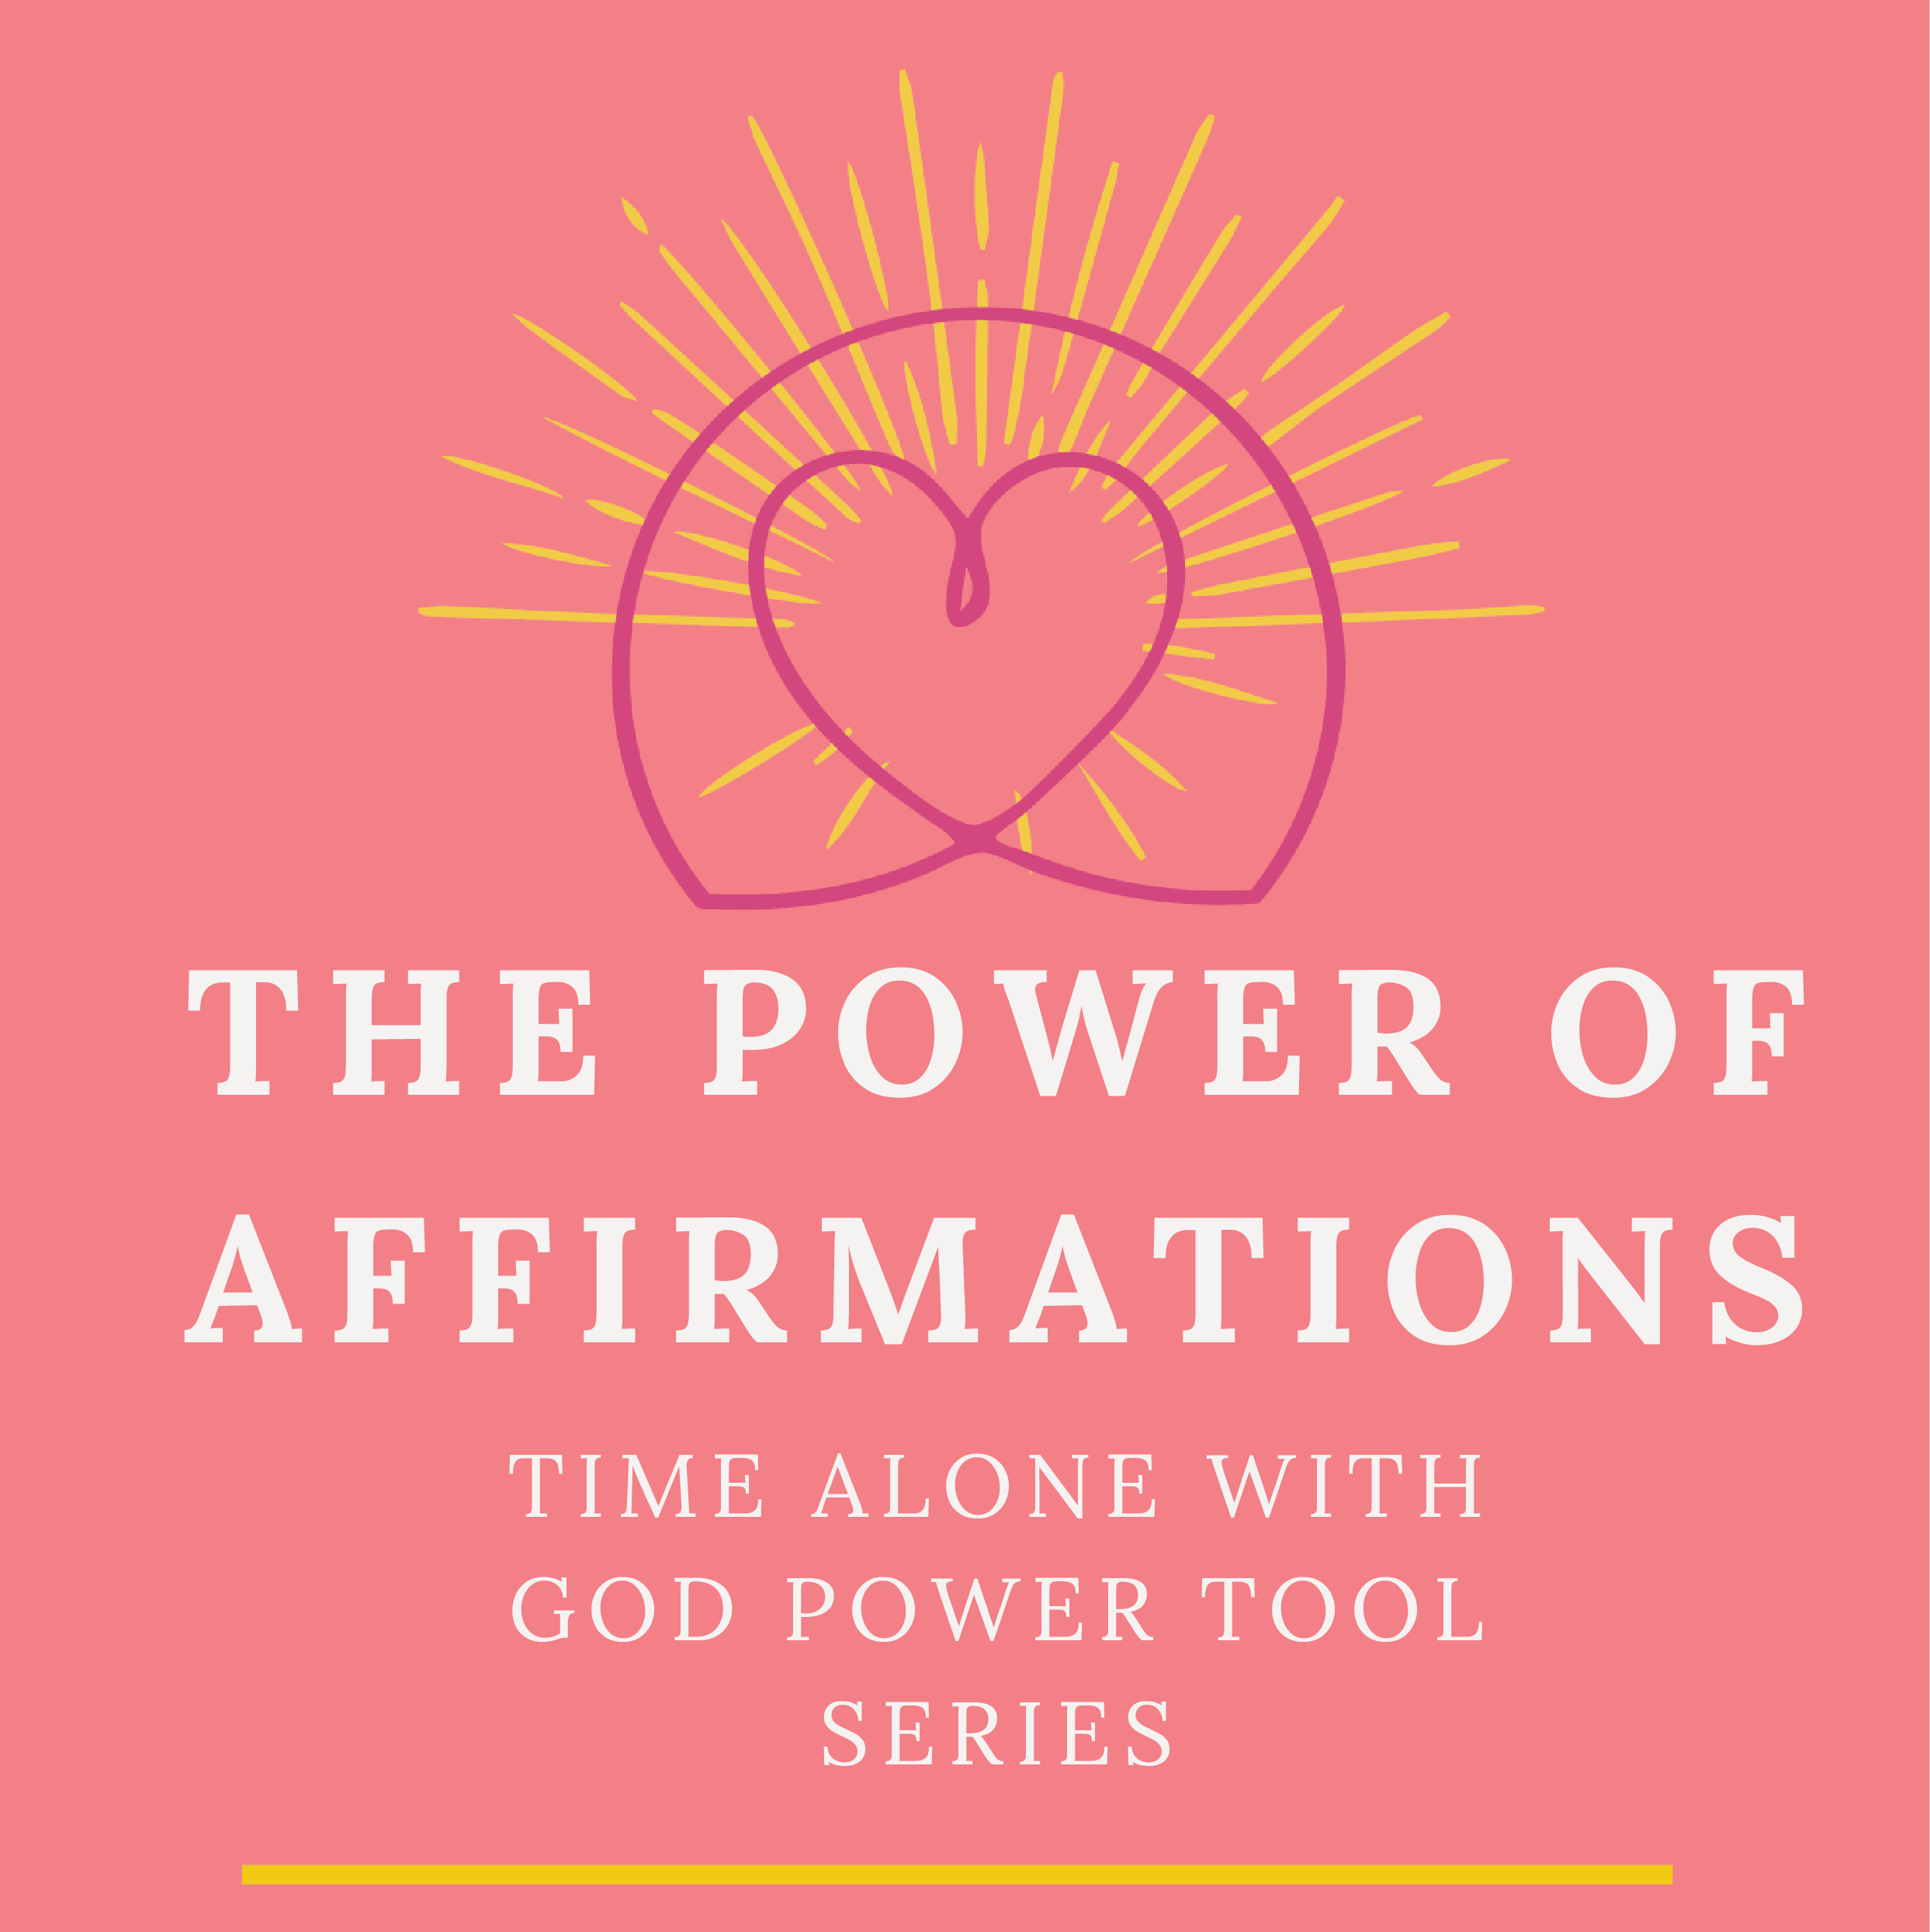 riane-inspires-power-of-affirmations-01.png